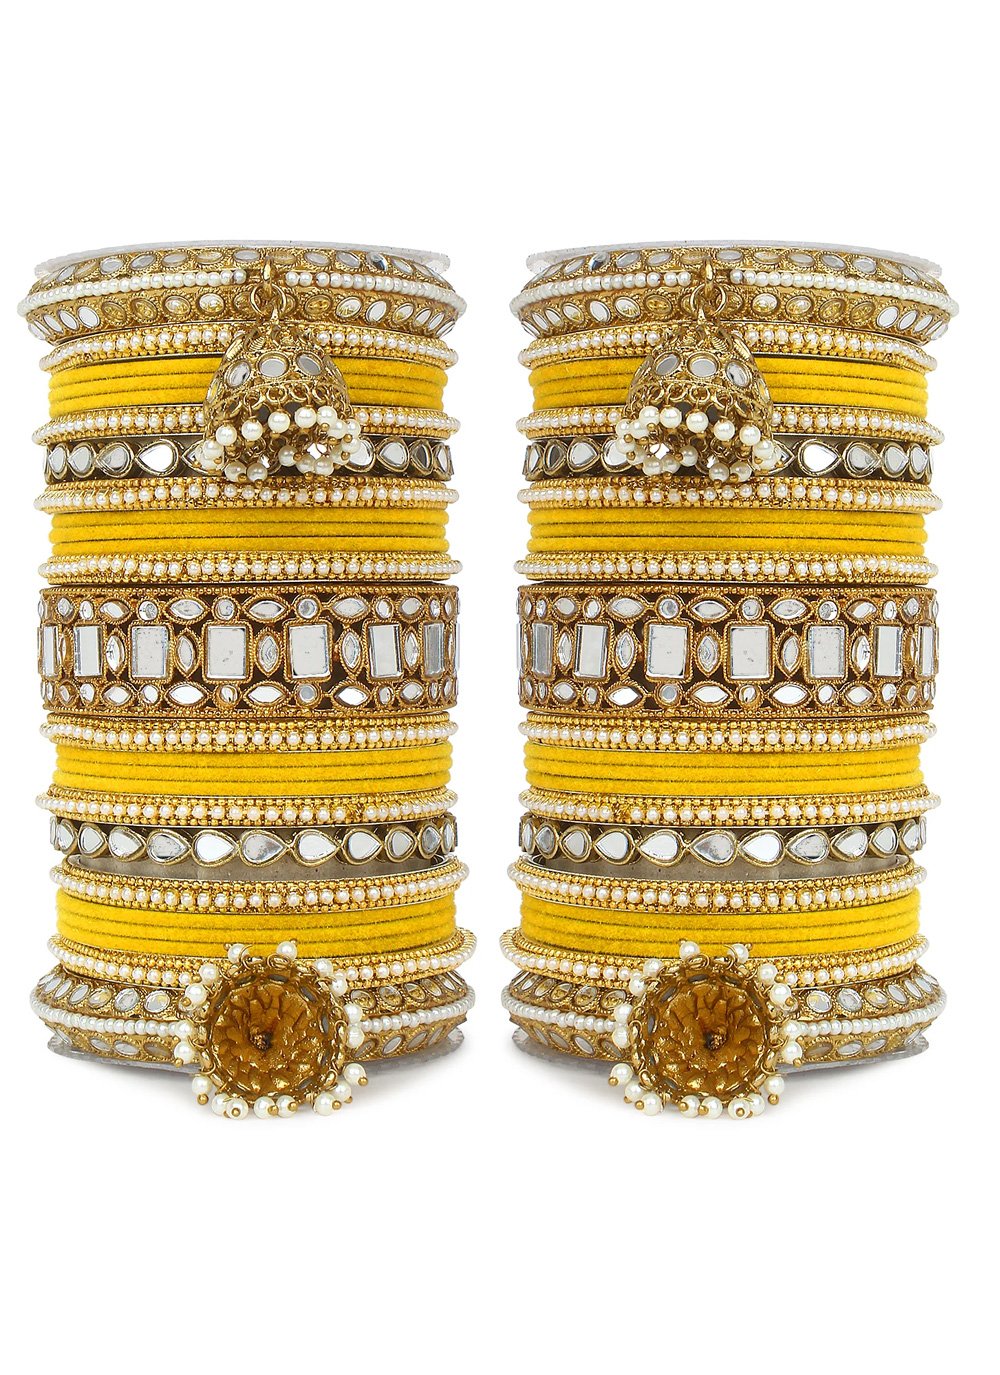 Dignified Alloy Gold and Yellow Beads Work Bangles